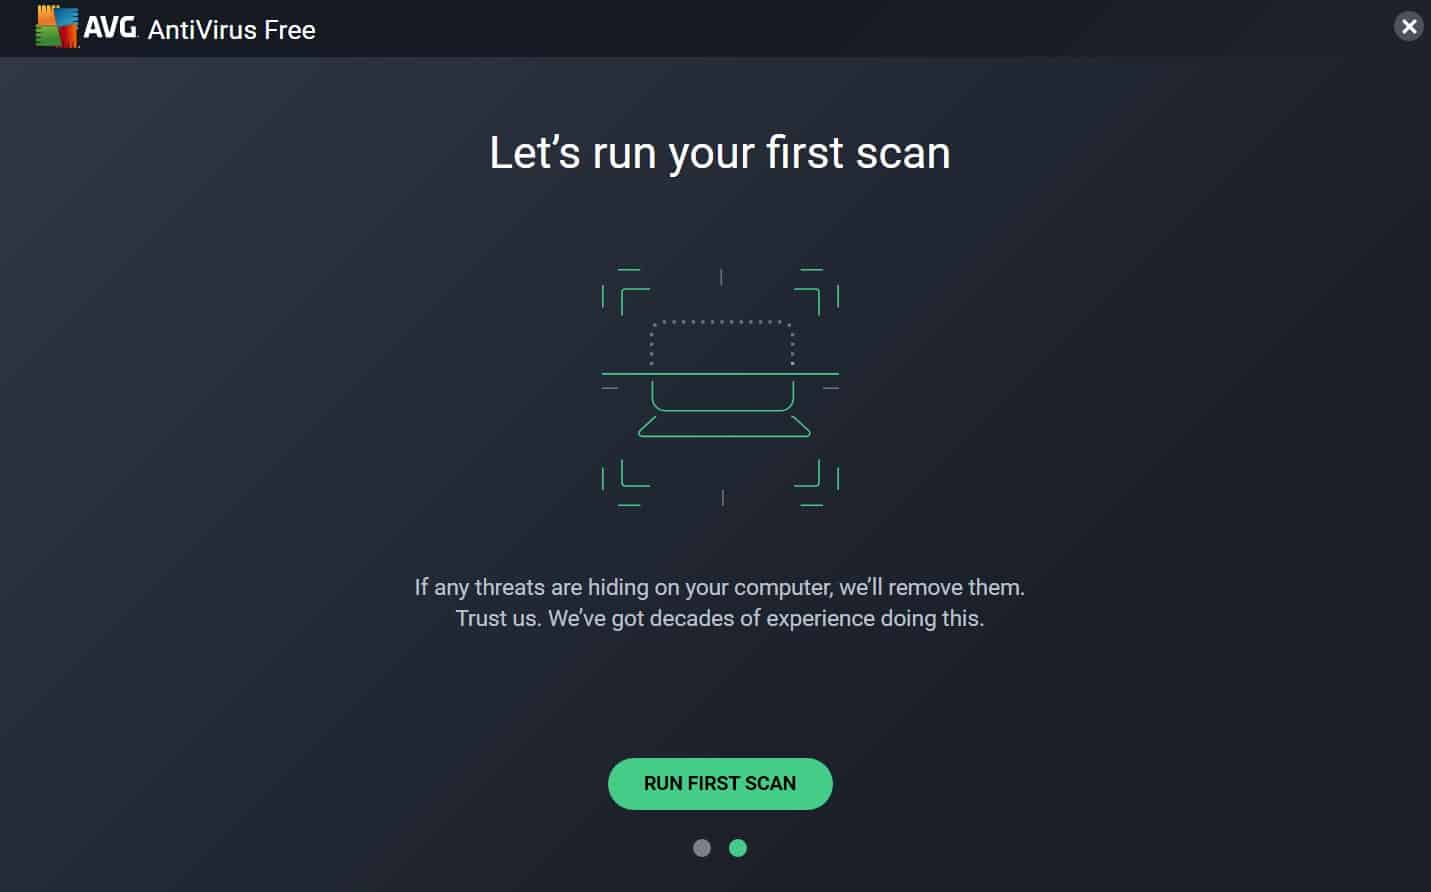 Open your antivirus software or download a trusted antivirus program if you don't have one.
Run a full system scan to check for any viruses or malware.